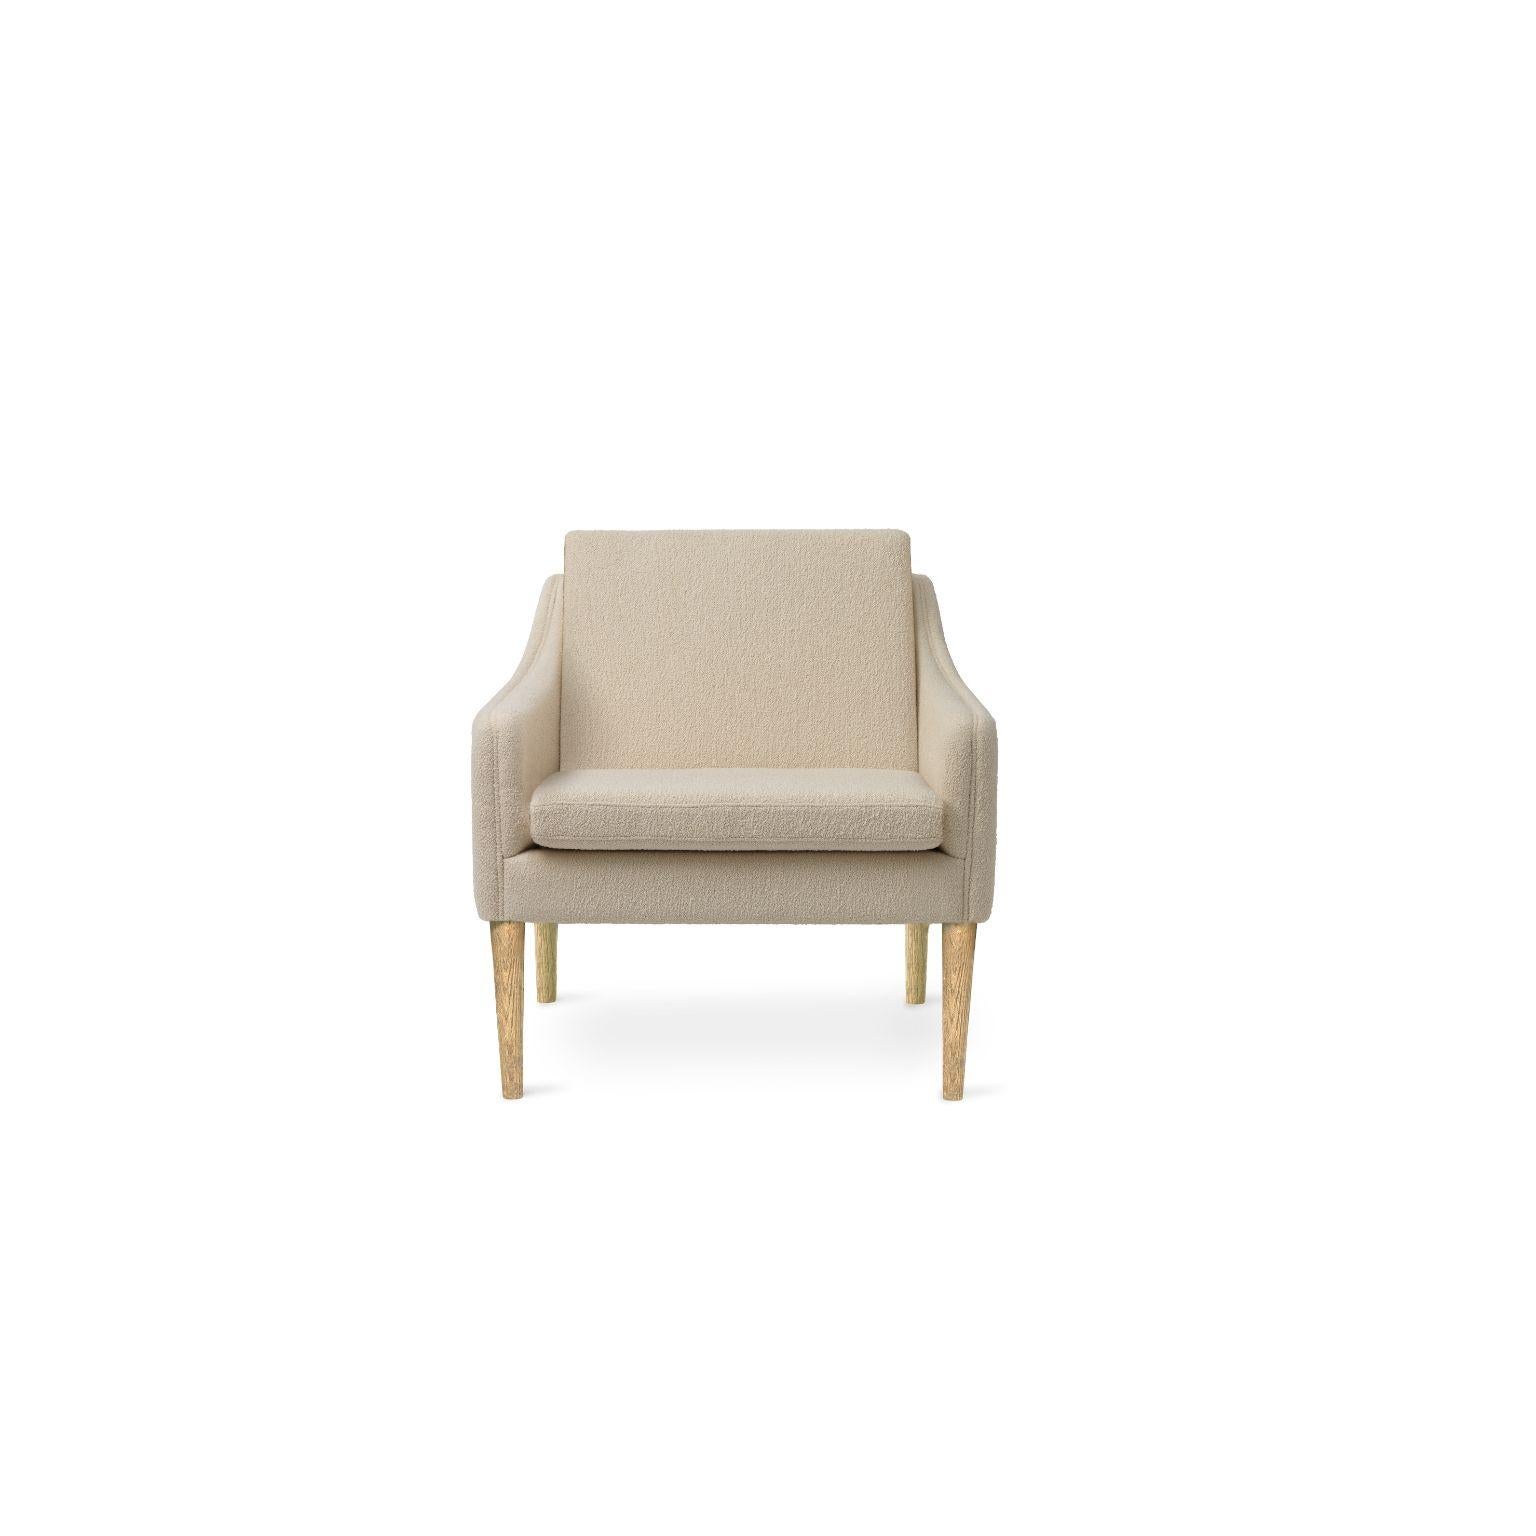 Mr. Olsen lounge chair solid smoked oak cream by Warm Nordic.
Dimensions: D81 x W79 x H 78 cm
Material: Textile upholstery, Foam, Spring system, Oak
Weight: 27 kg
Also available in different colours, materials and finishes.

A classic,